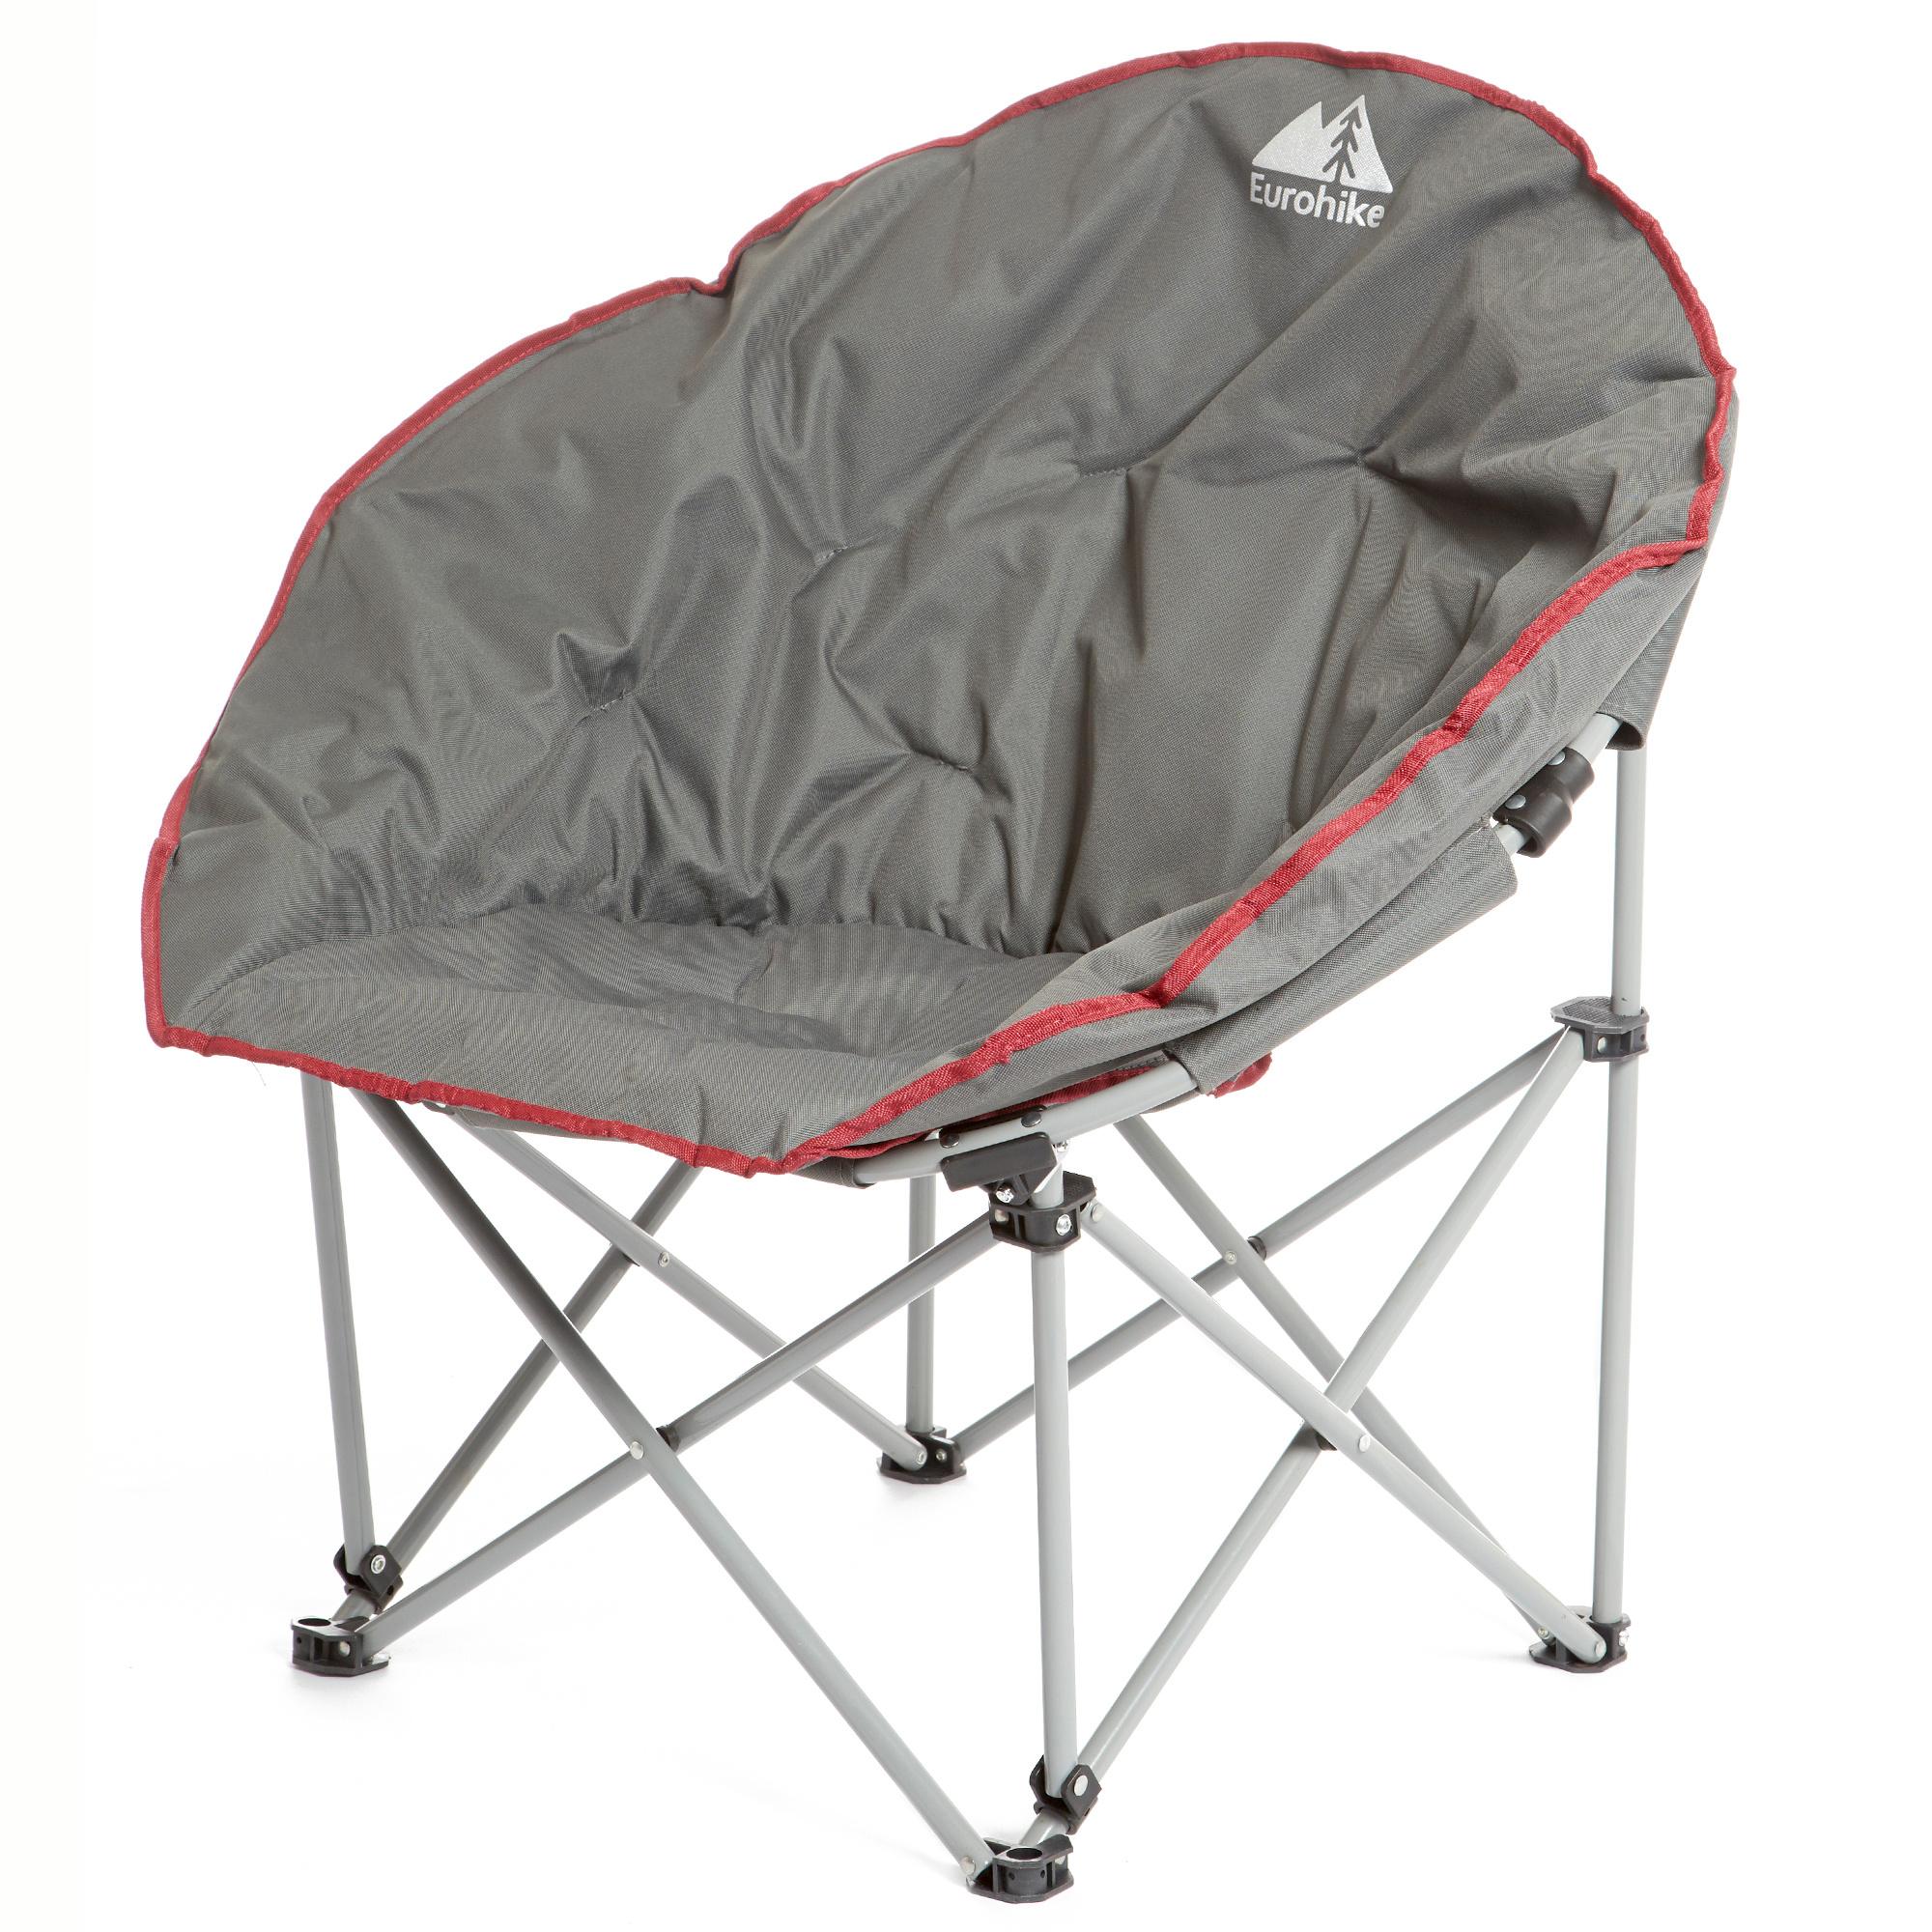 New Eurohike Deluxe Fishing Camping Furniture Moon Chair Ebay